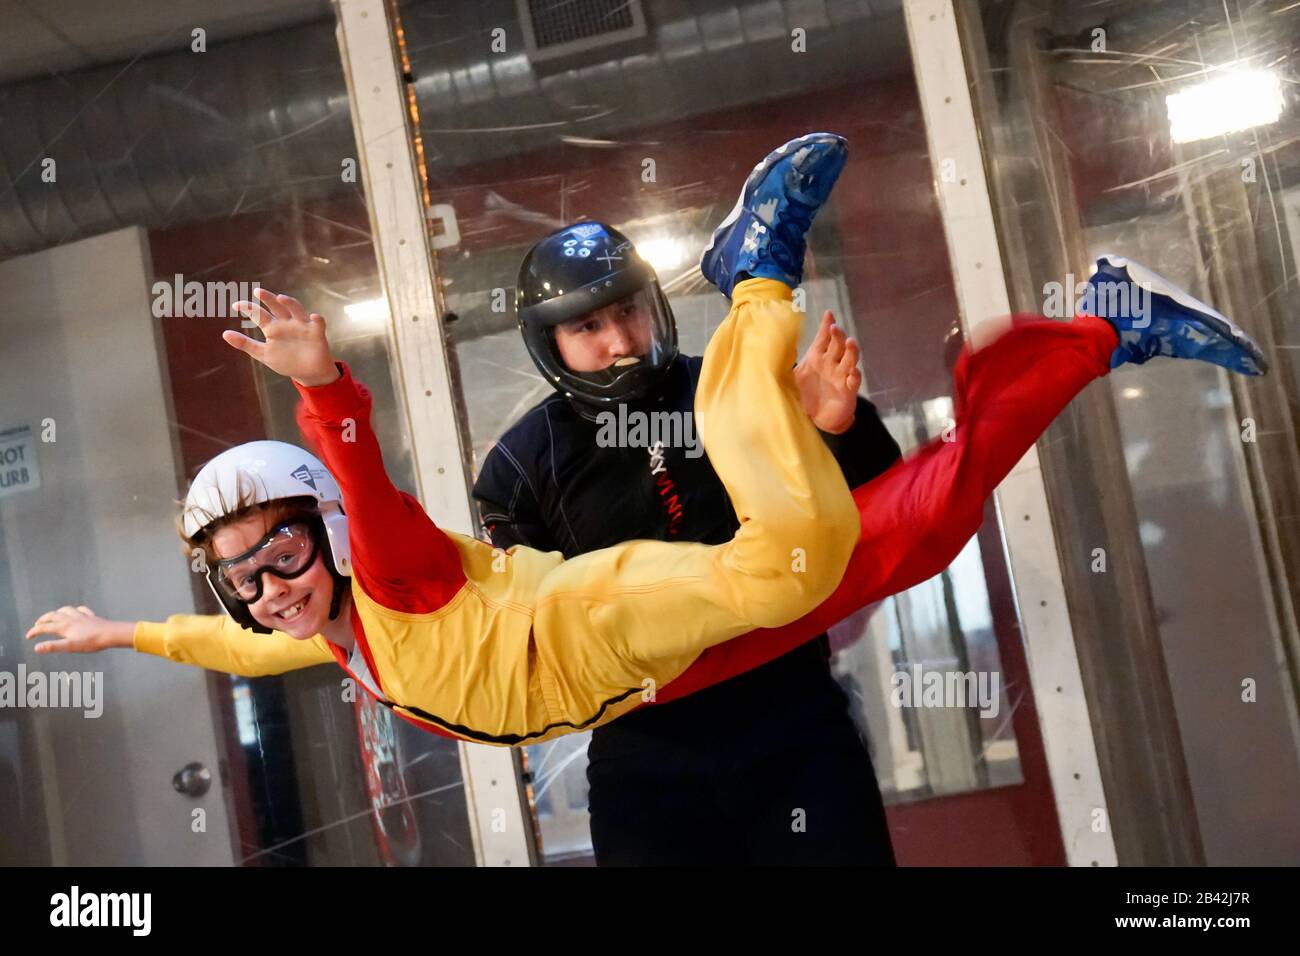 A boy smiles while indoor skydiving. Stock Photo